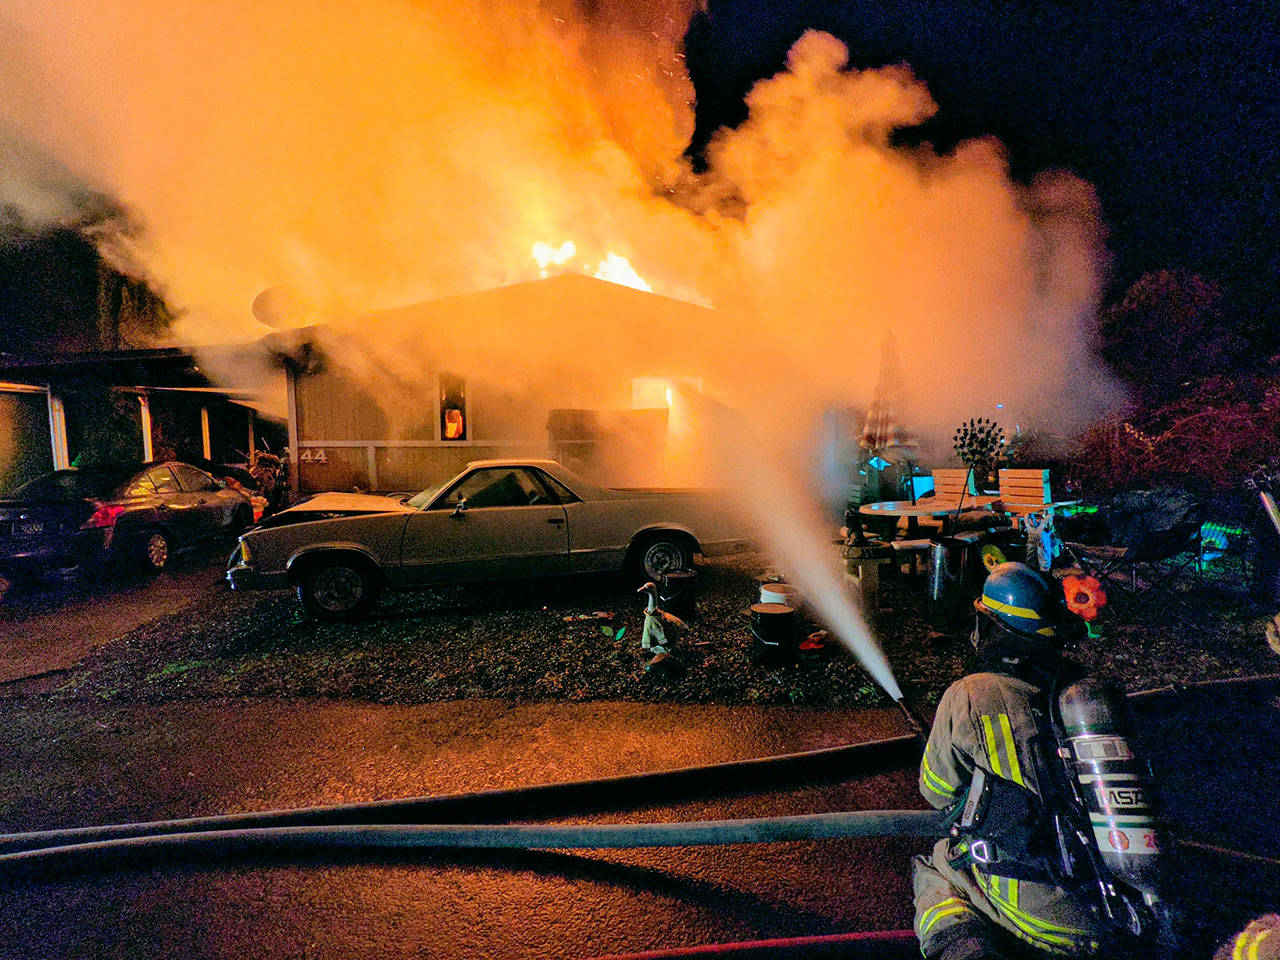 Clallam County Fire District 3 personnel battle a mobile home fire on the 900 block of South Third Avenue on Feb. 23. A resident who was able to get out of the home died a day later, according to relatives. Photo by Fire District 3/Facebook page